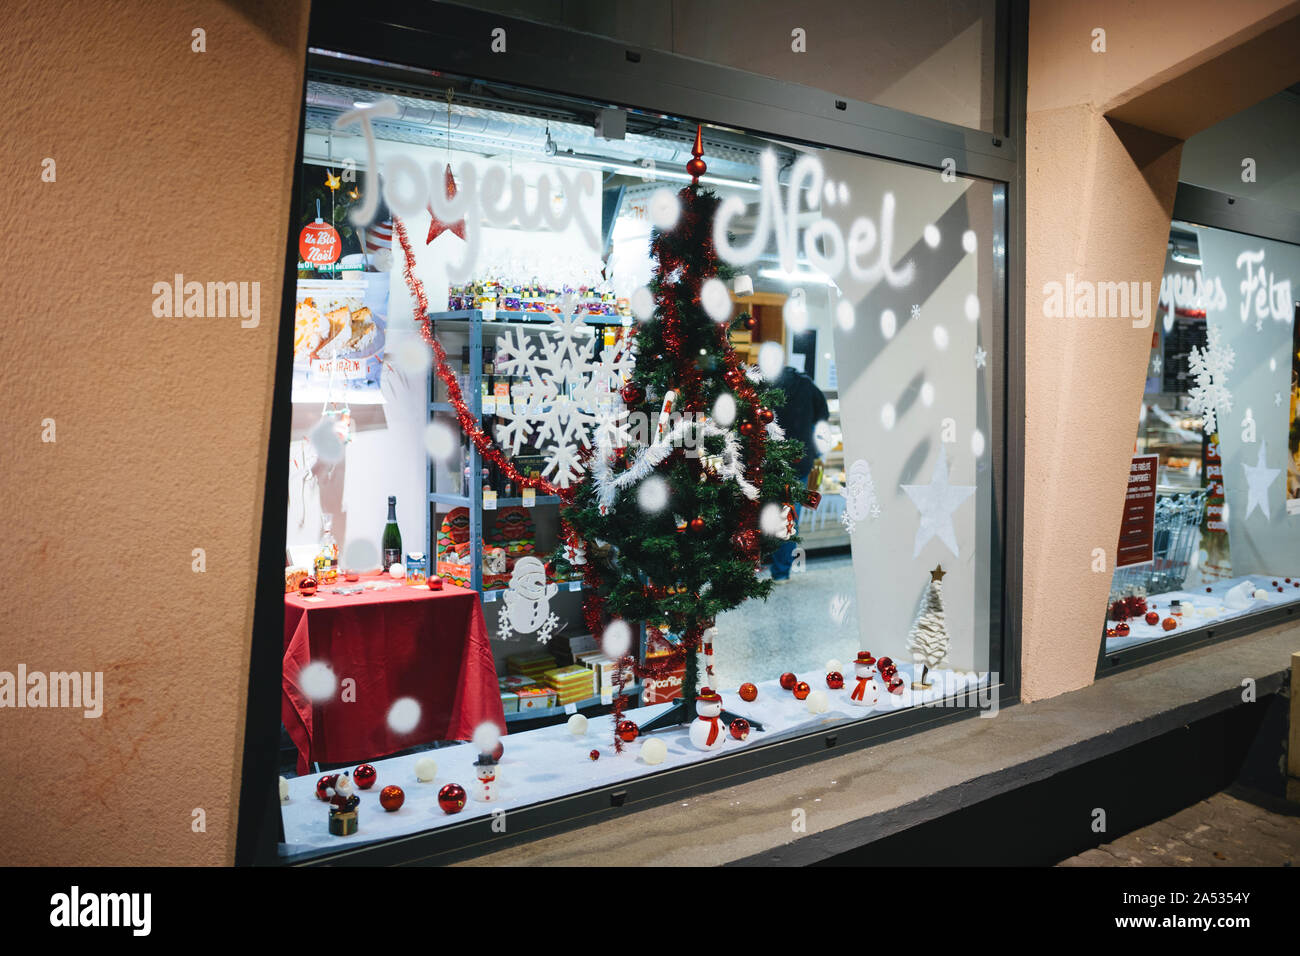 Strasbourg, France - Dec 2, 2017: Happy New Year inscription on the Naturalia Bio store in French city Stock Photo